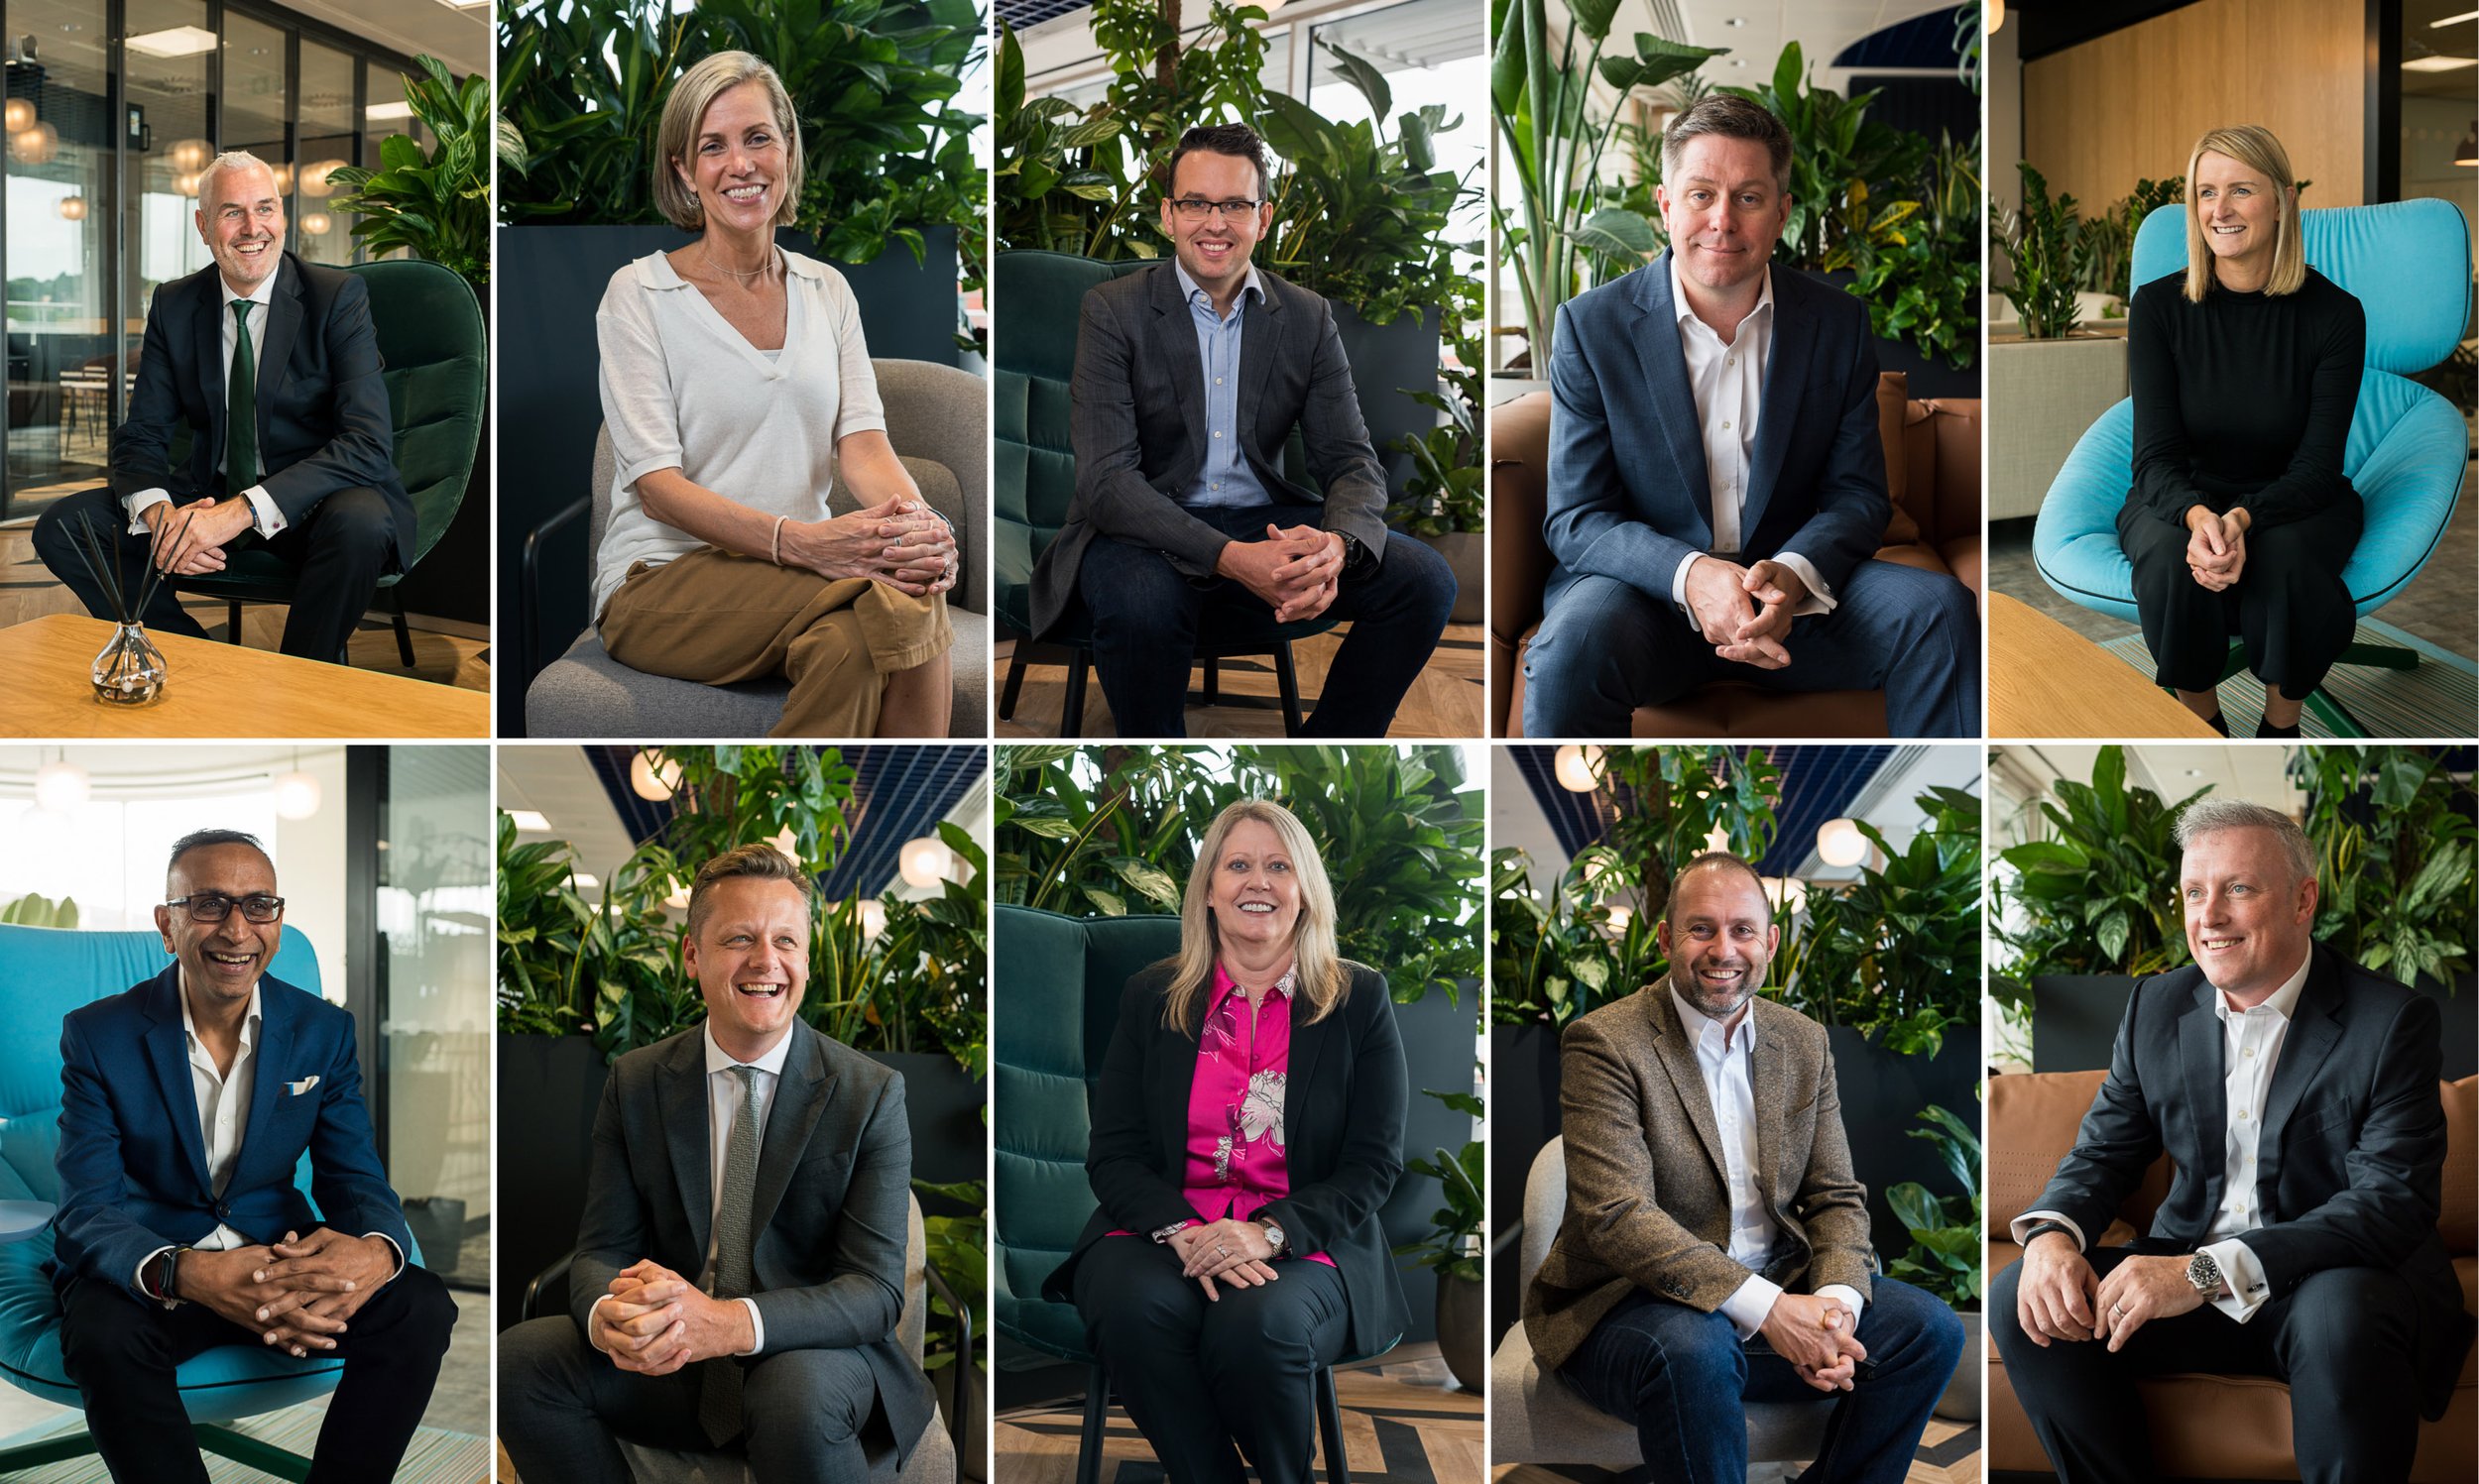 Relaxed corporate business photography